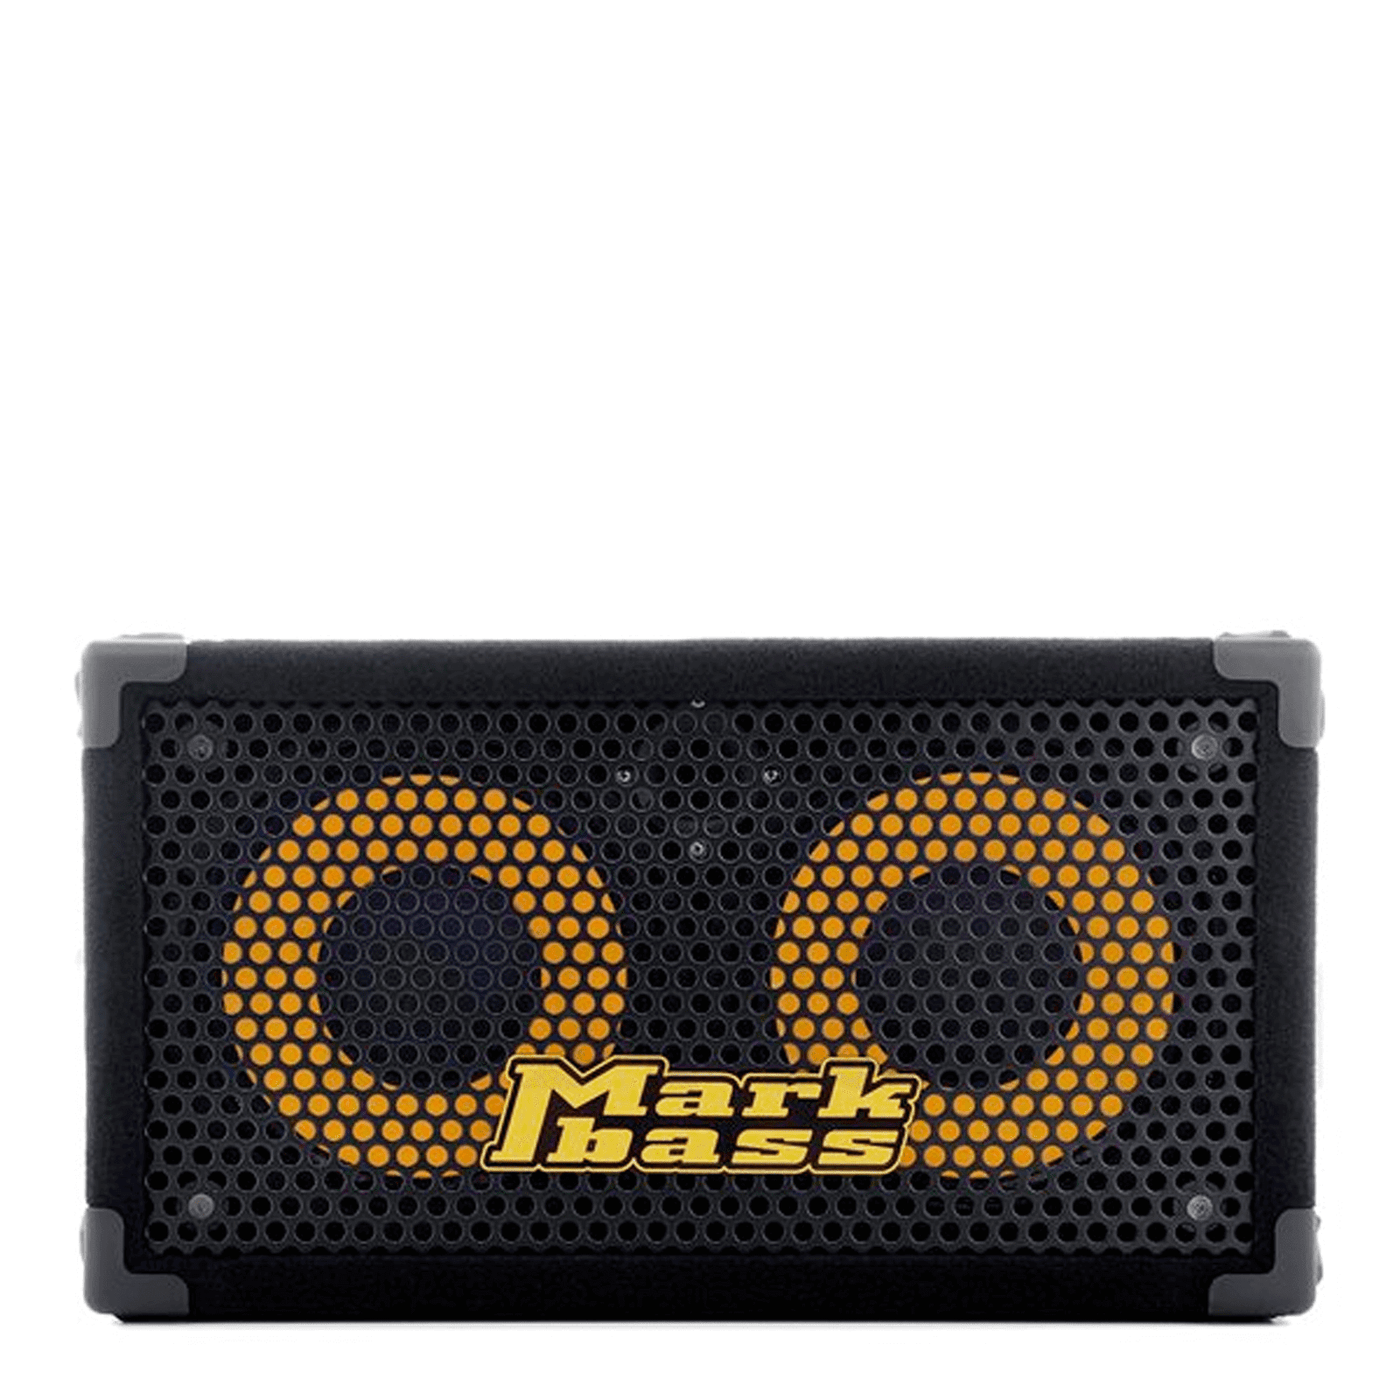 Markbass Traveler 102P - The Traveler 102P is one of the smallest and lightest 2x10" cabinets on the market. It can be used in either a vertical or horizontal position. Perfect for club gigs, this cab especially shines when added to a Traveler 151P for a